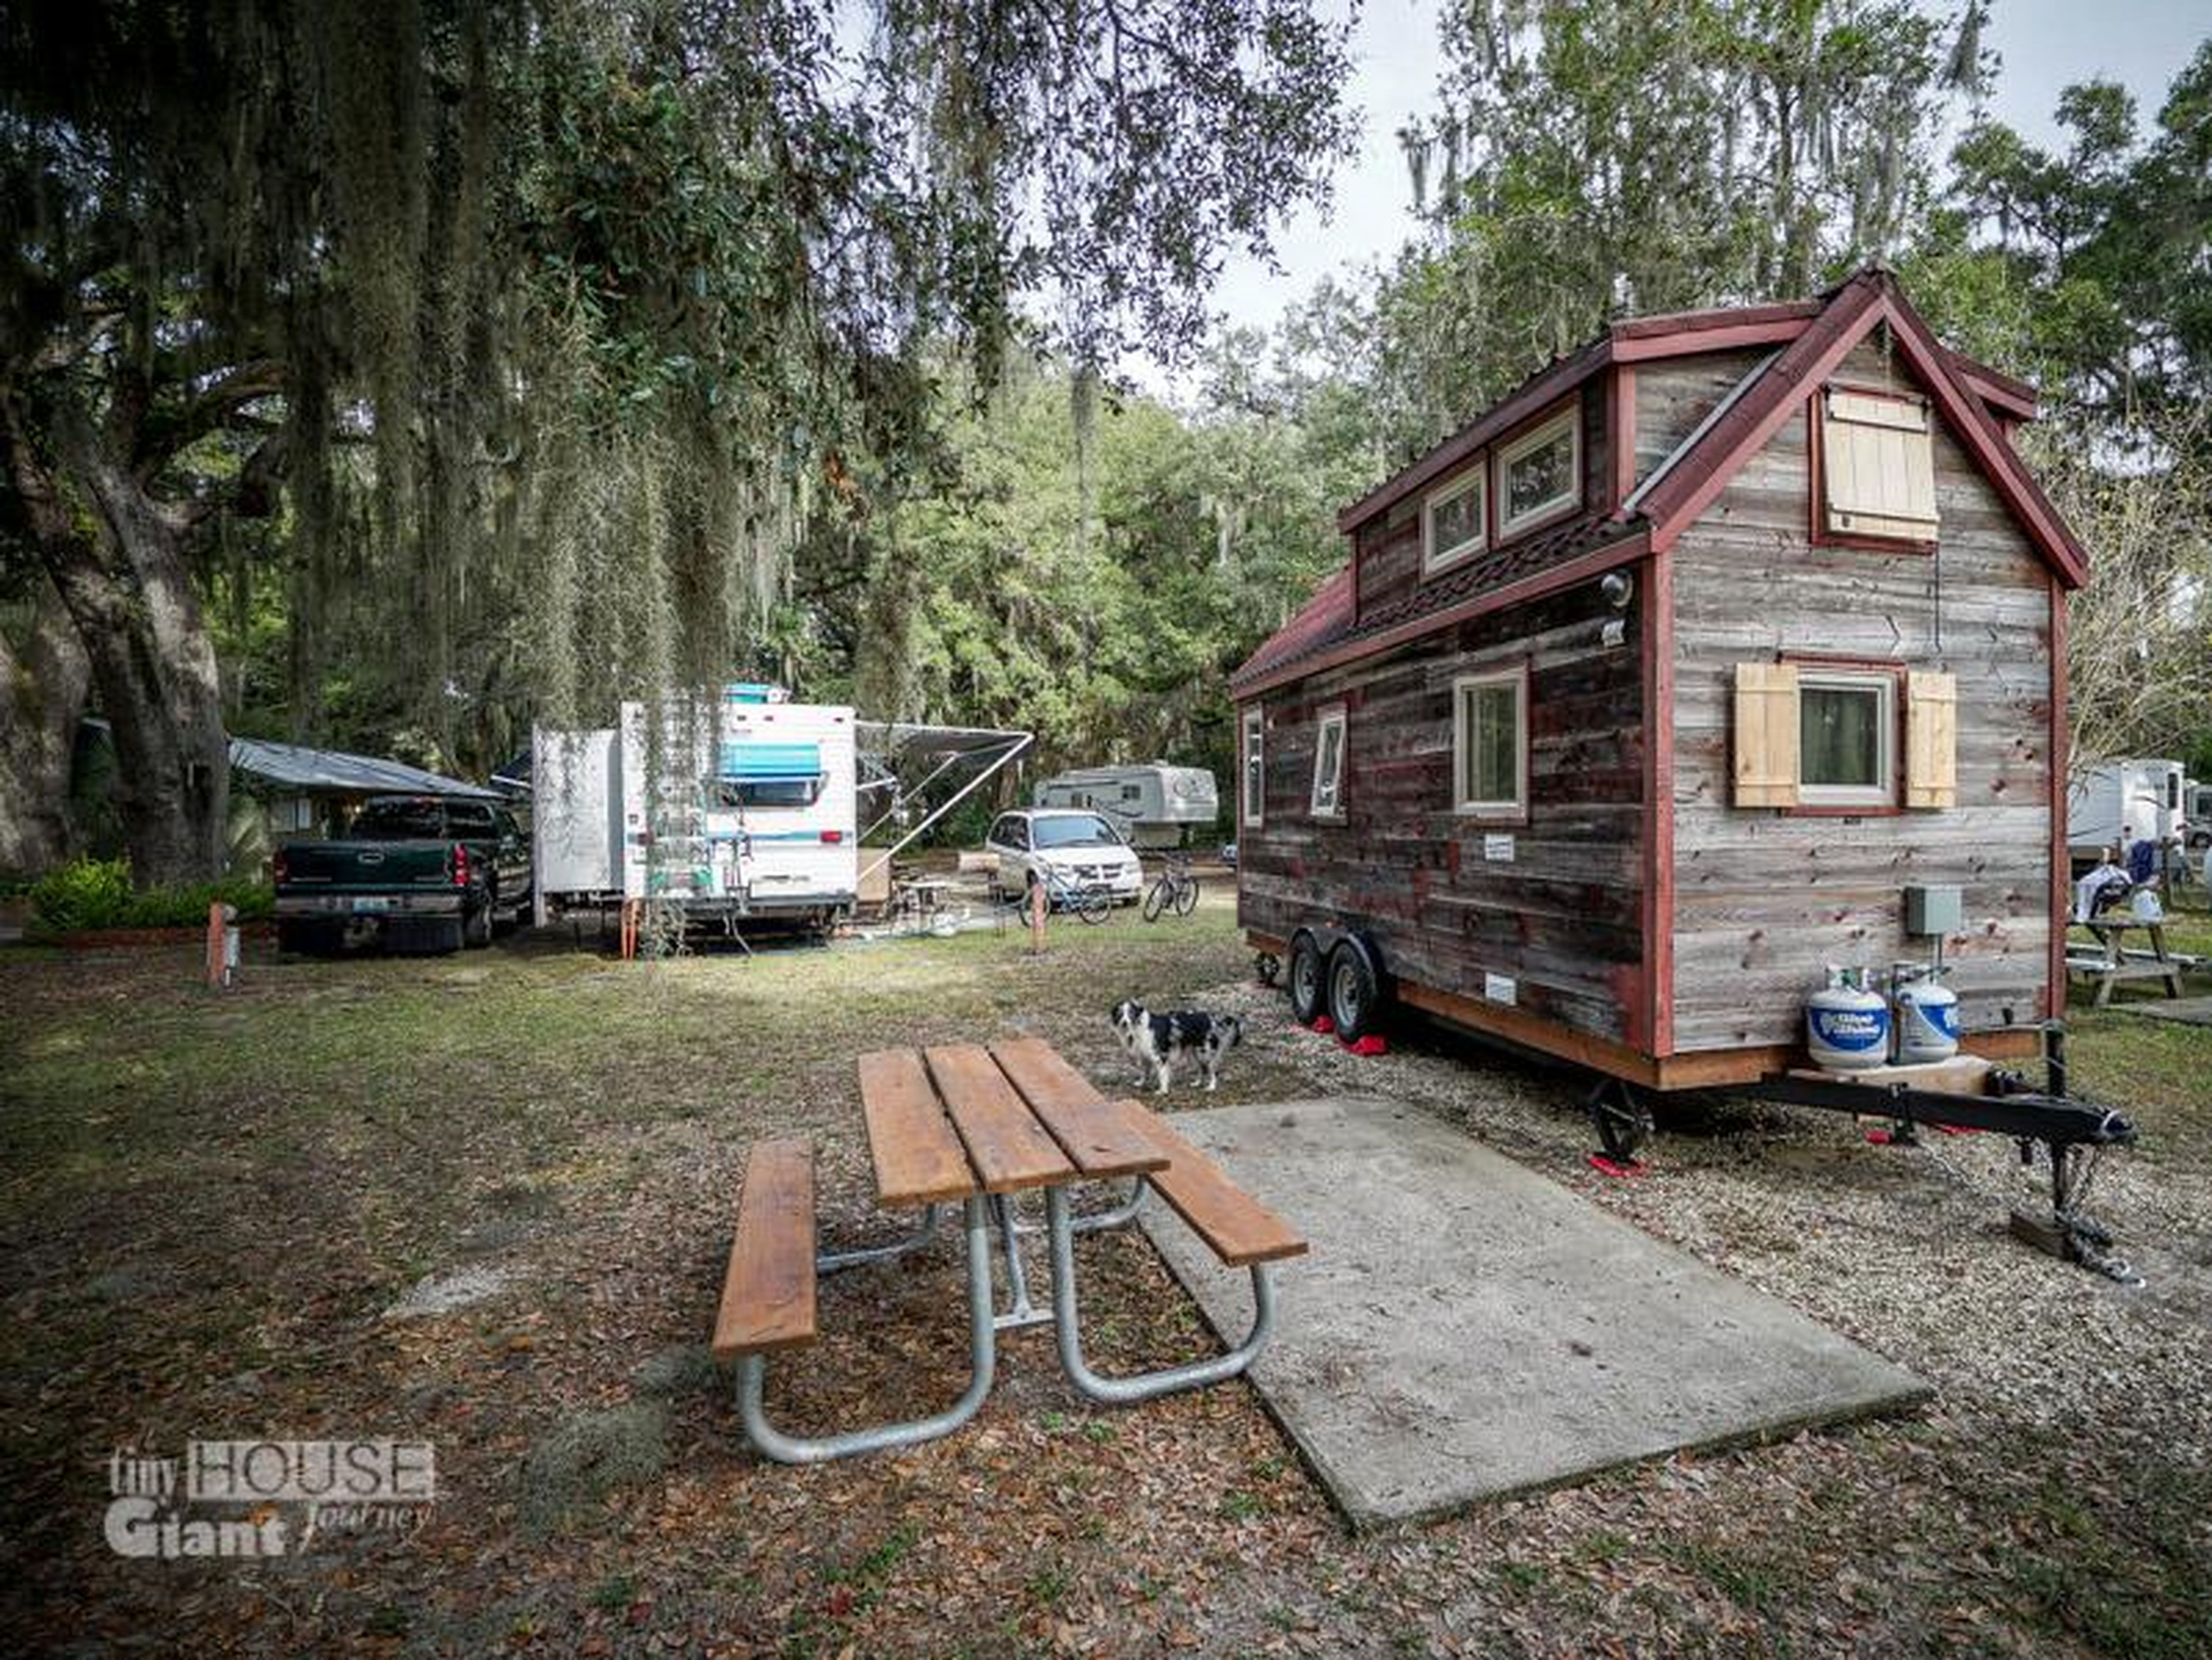 Her tiny house is also restricted by weight, which is determined by axle size. "I can't add a marble countertop or a tile bathroom to my house," she wrote. "I have to think about every single item I bring in to my home. Often,